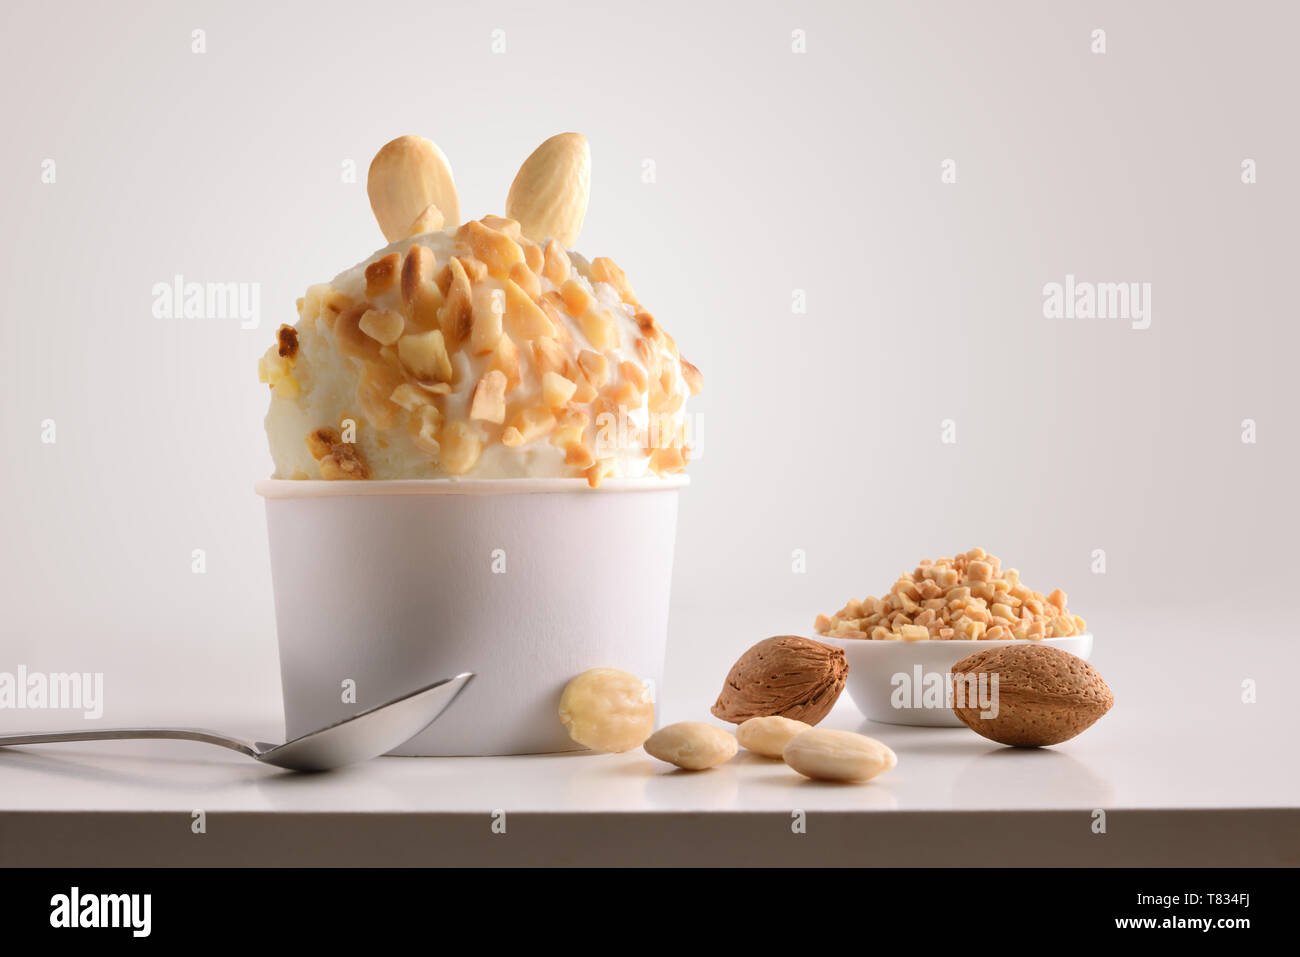 https://c8.alamy.com/comp/T834FJ/composition-of-almond-ice-cream-ball-in-paper-cup-on-white-table-with-products-of-ornament-and-elaboration-isolated-background-horizontal-composition-T834FJ.jpg